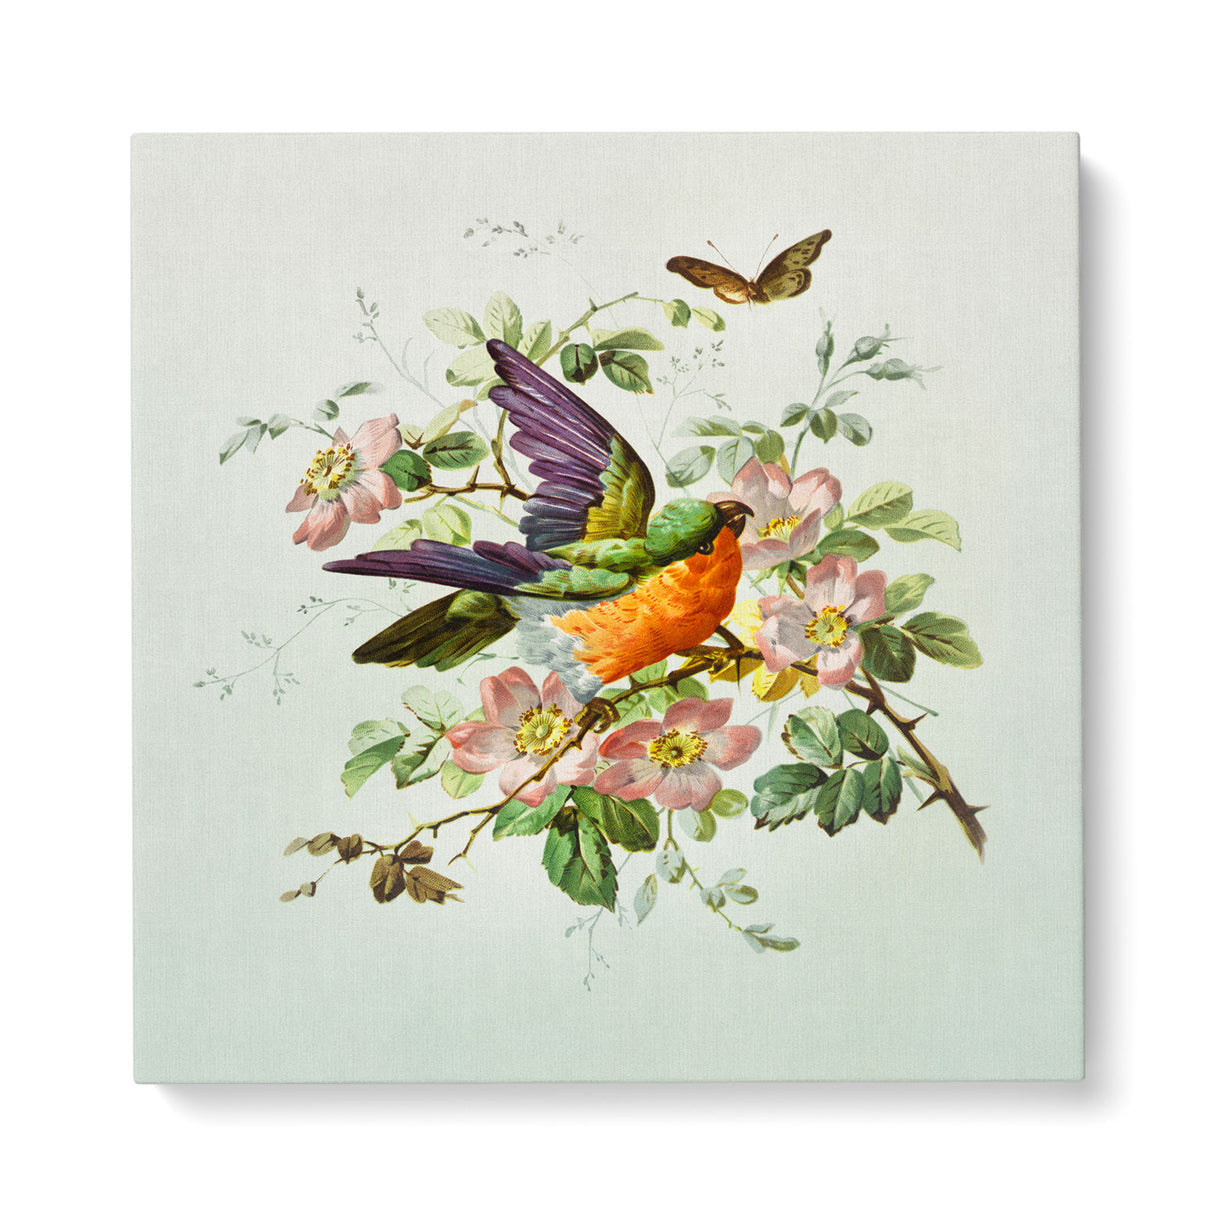 "Vintage Birthday Card with Birds, Flowers, and Butterflies" Wall Art Canvas Print Canvas Wall Art Sckribbles 40x40  